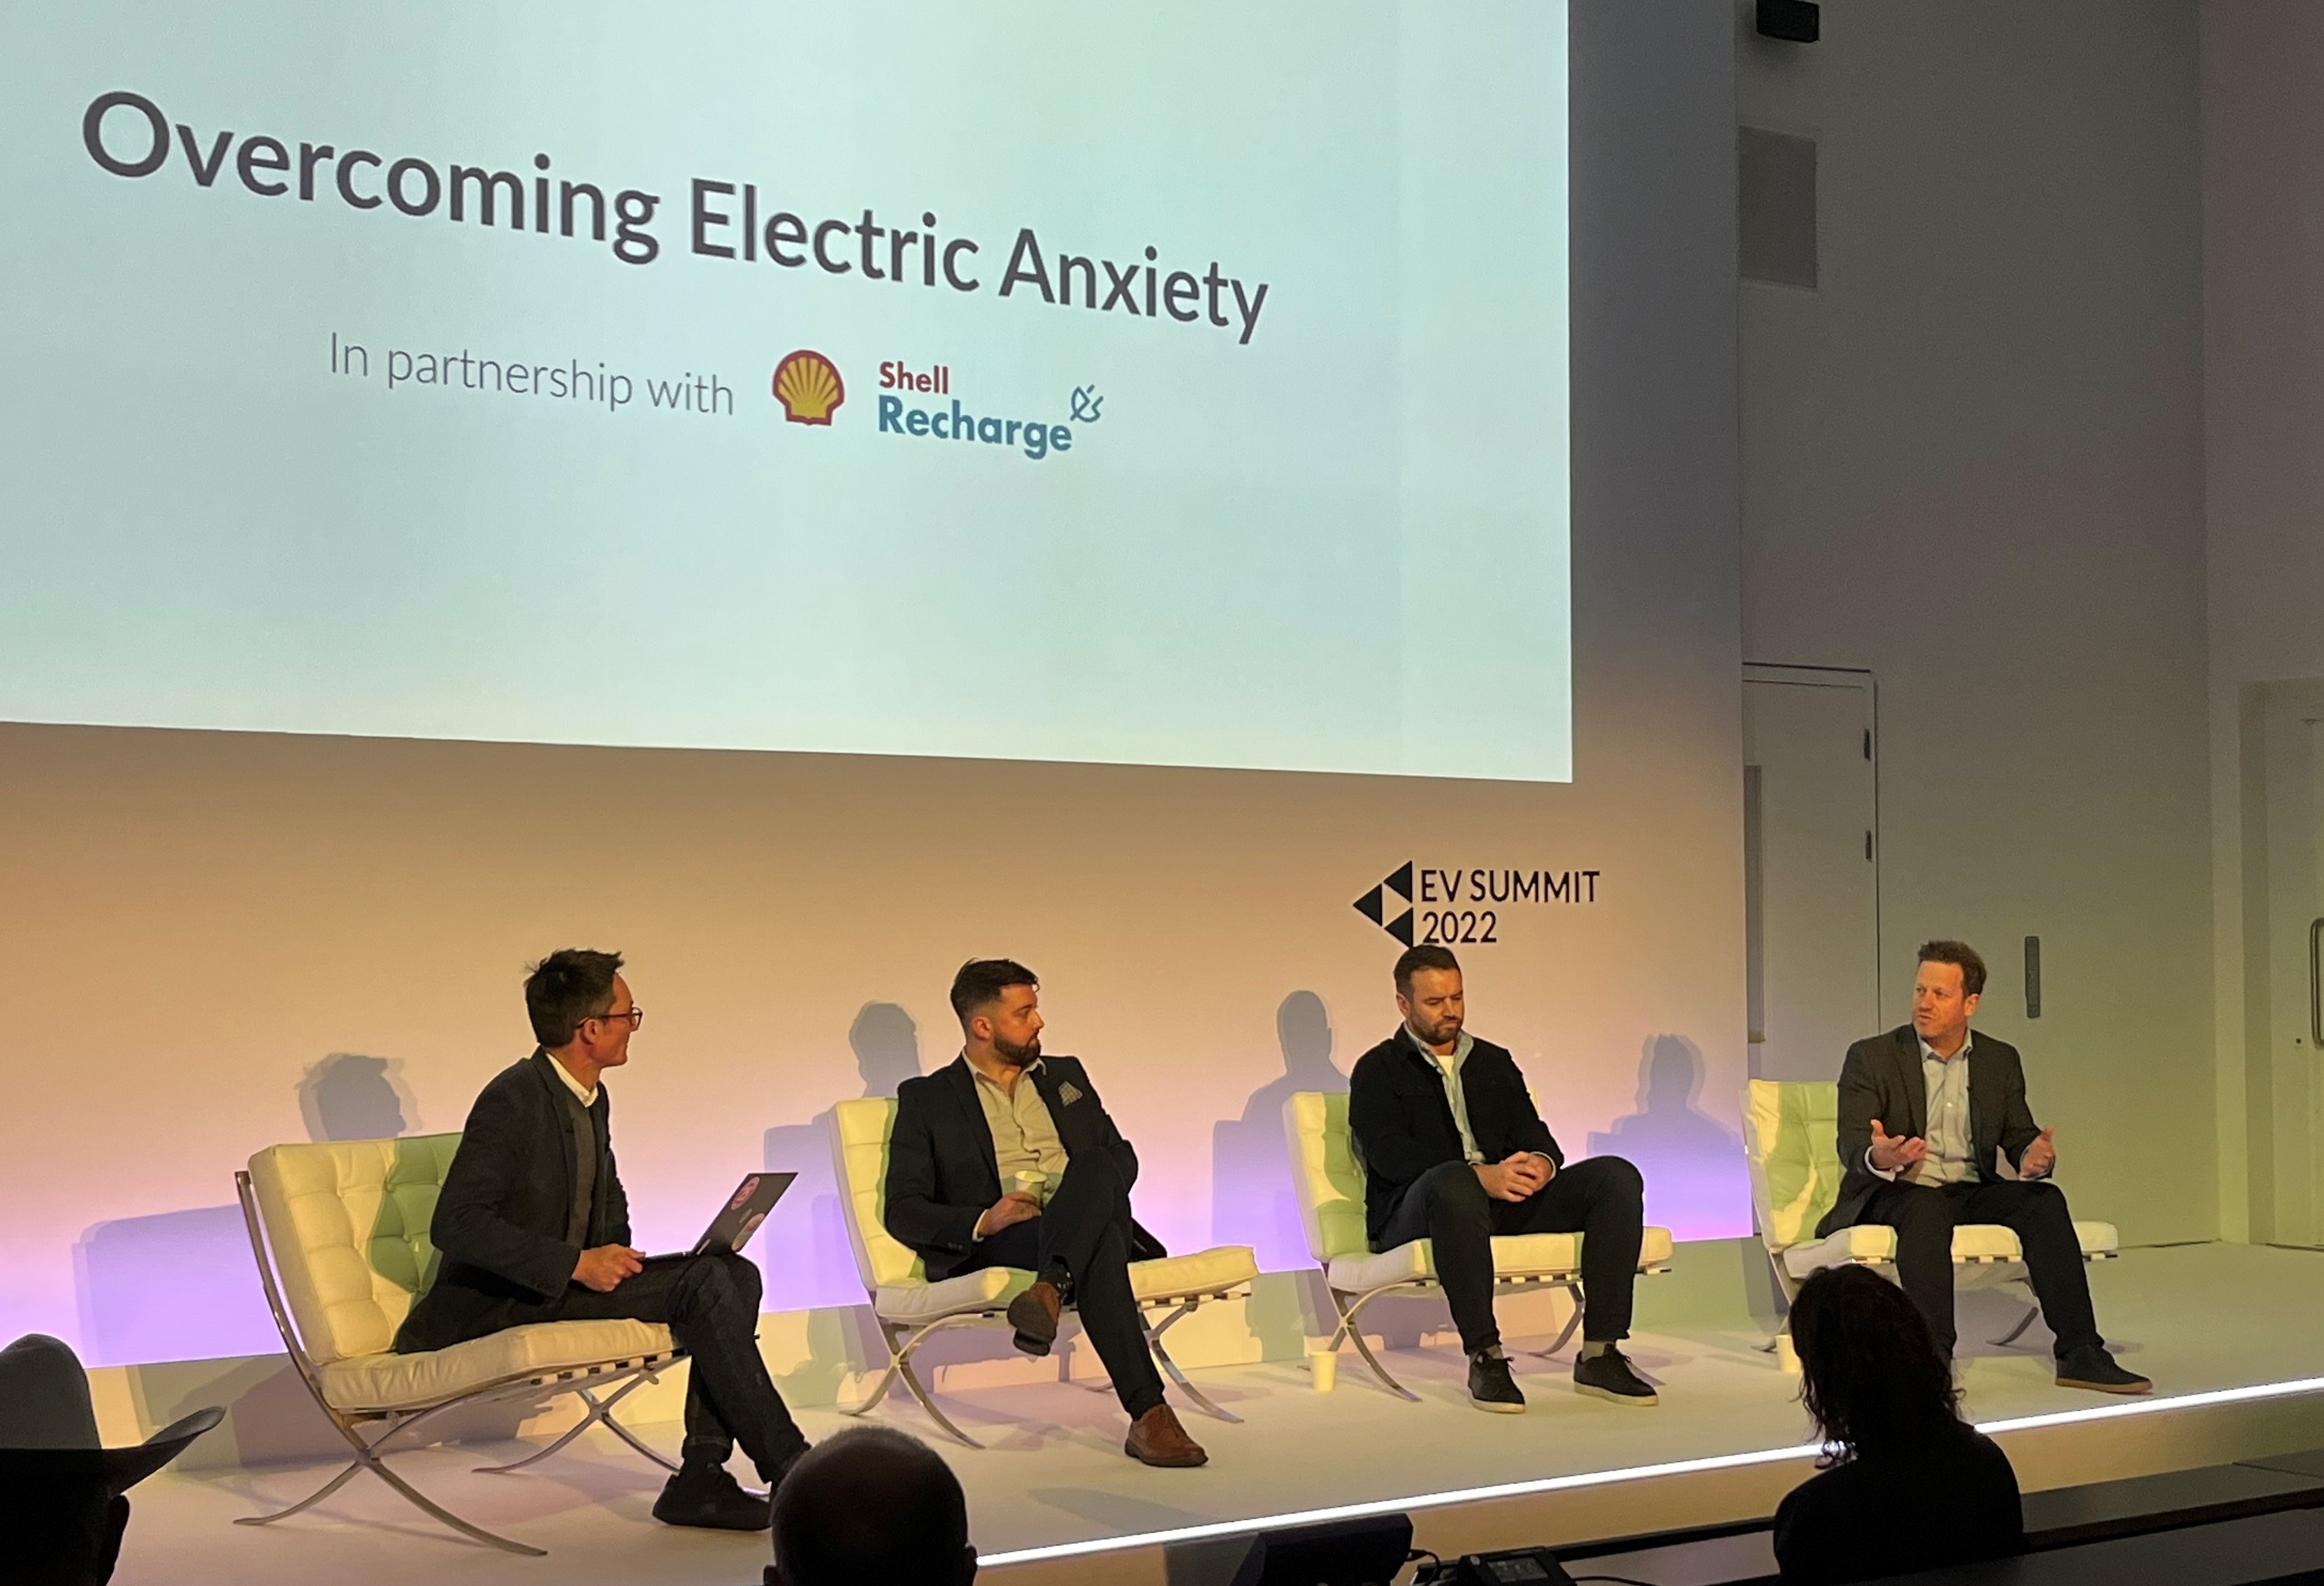 Charging ahead: Discussing the issue of charging anxiety at the EV Summit (left to right): Mark Palmer of AutoTrader, Ben Cooke of UK Parking Control, Jonathan Jenkins of Motability, and Toby Butler of ubitricity